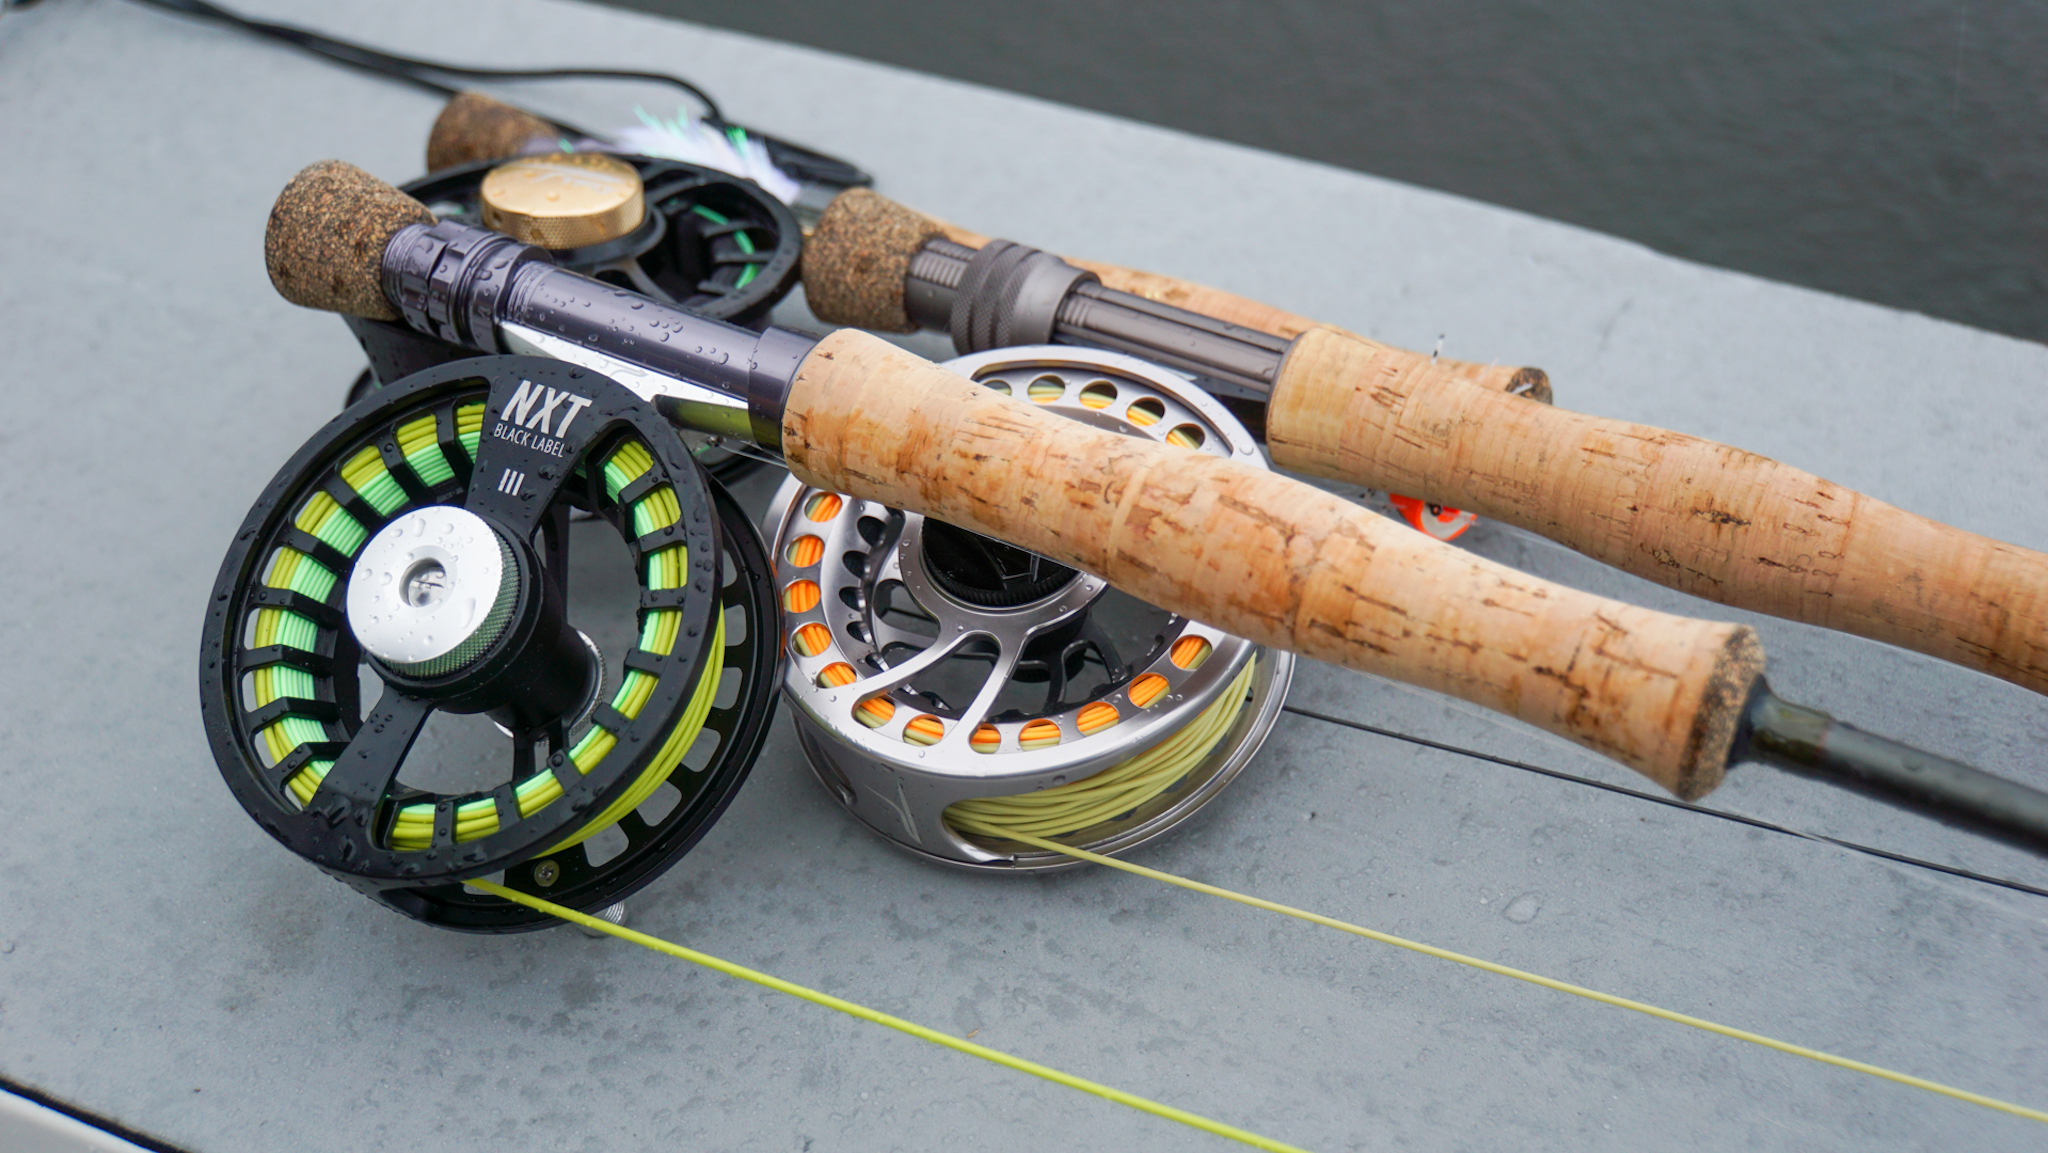 TEMPLE FORK OUTFITTERS NXT BLACK LABEL FLY REEL - REVIEW 